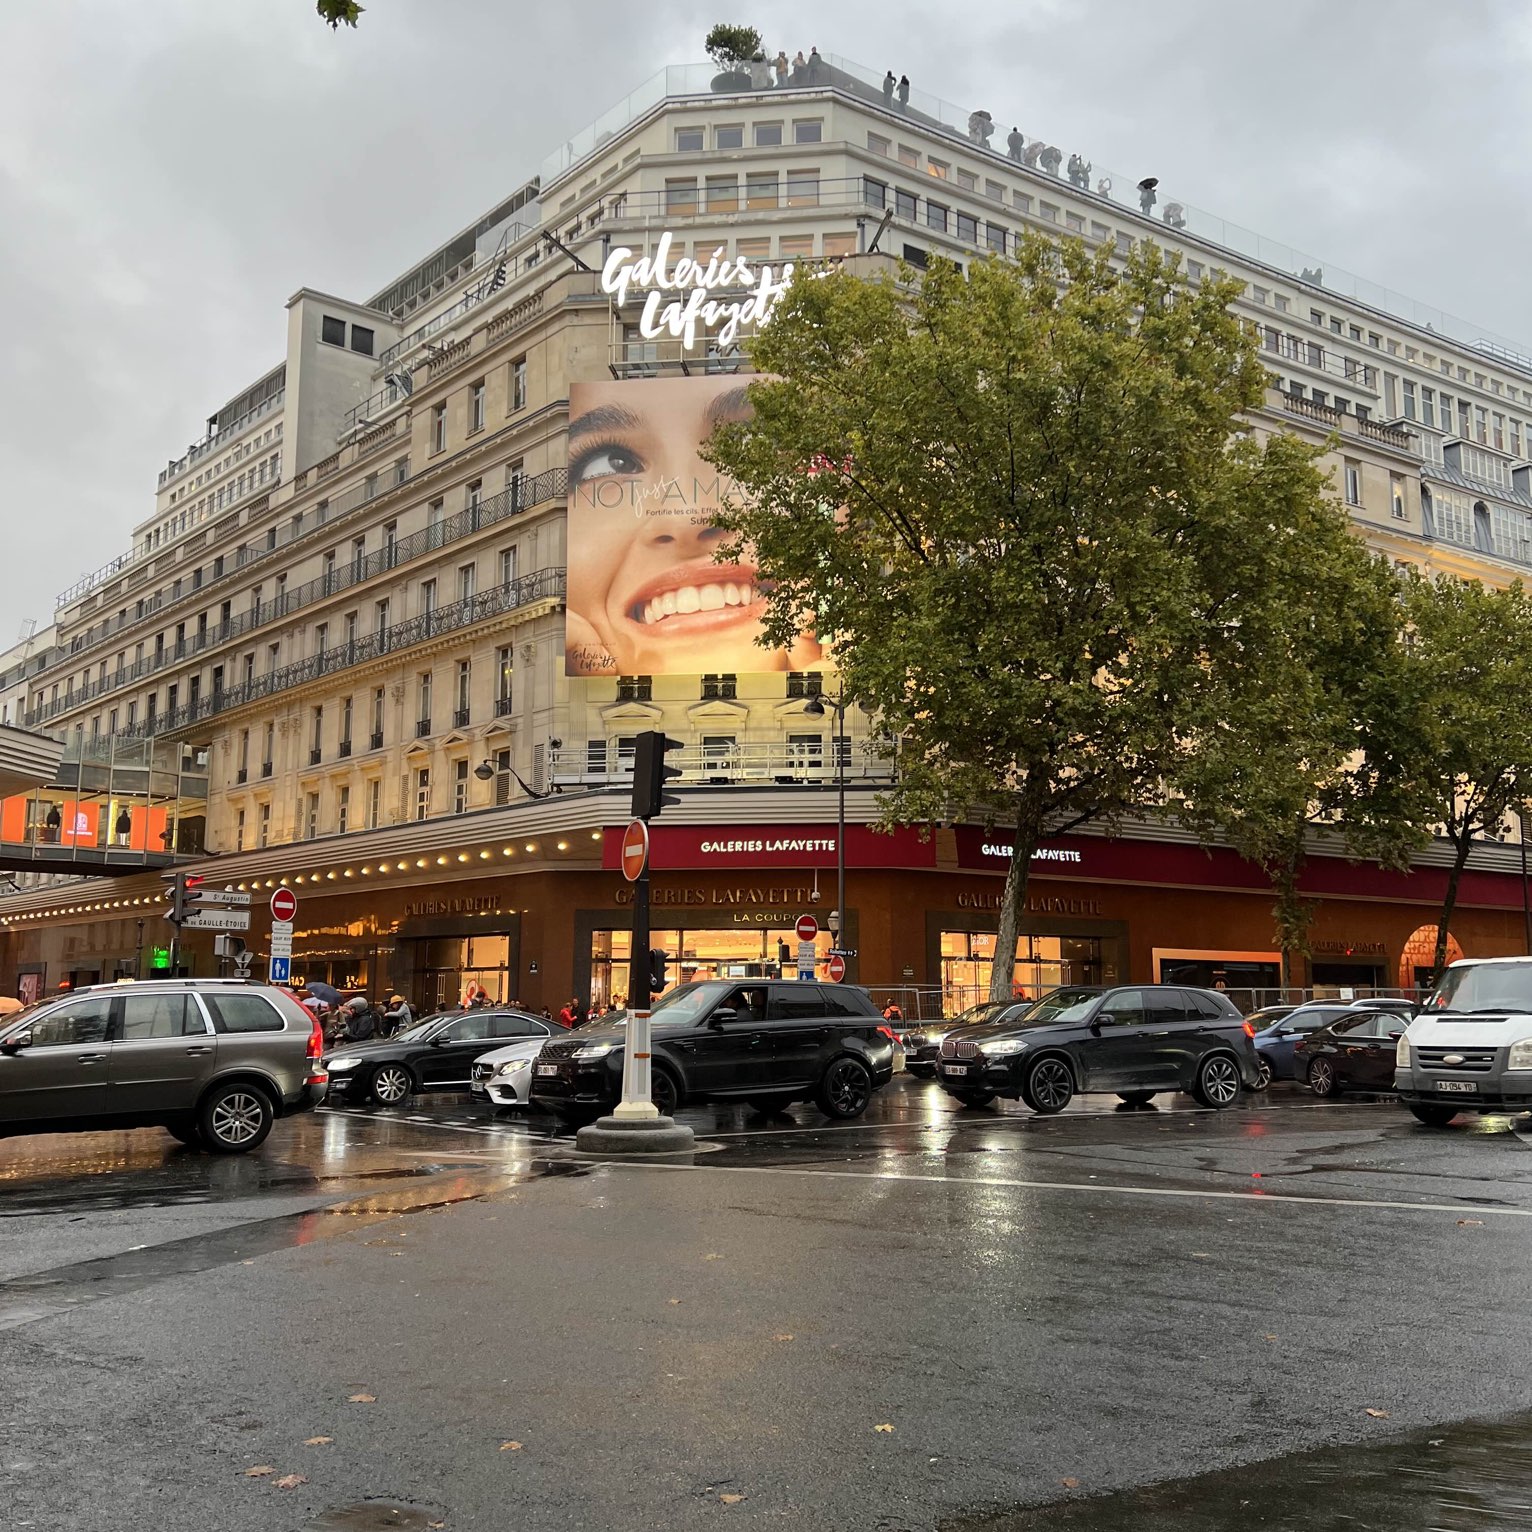 New Experiences at Galeries Lafayette